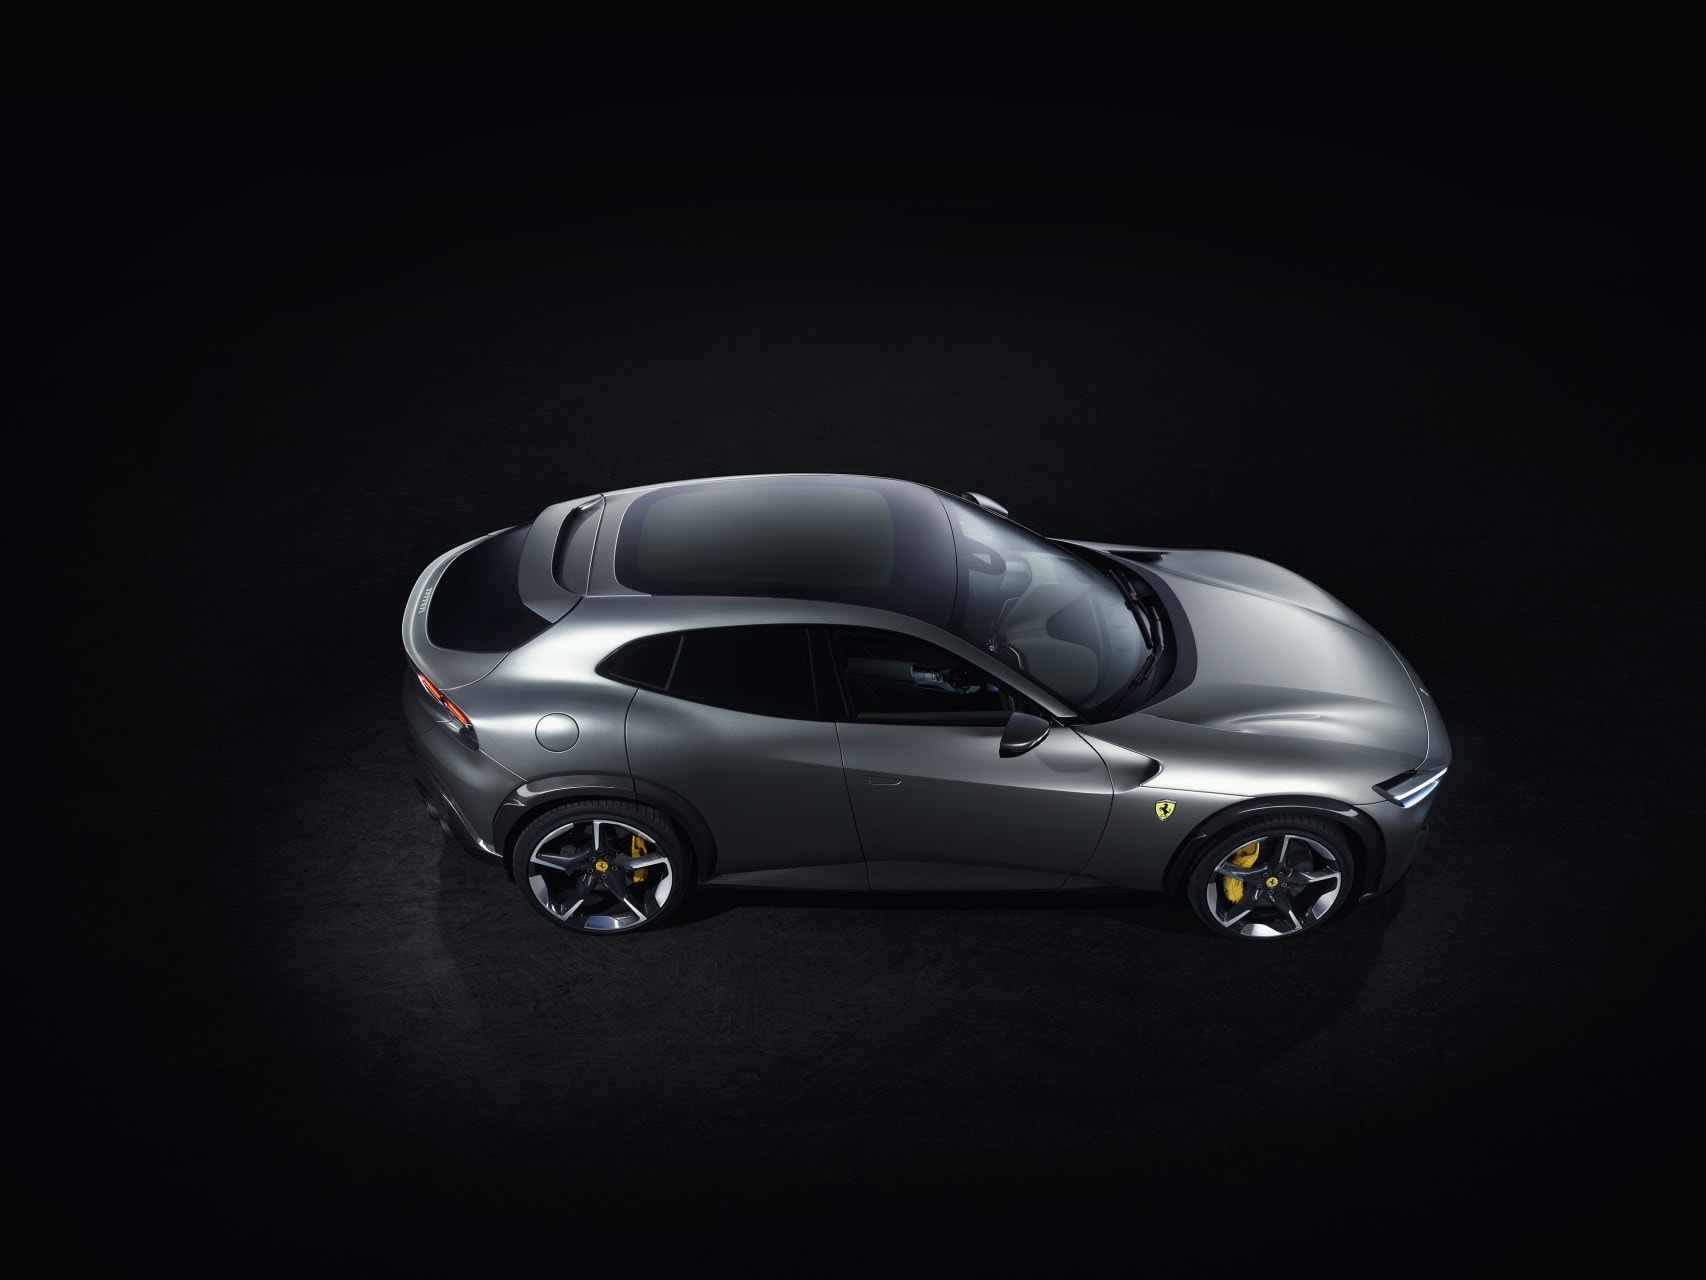 https://s1.cdn.autoevolution.com/images/news/ferrari-confirms-new-sales-record-four-new-models-planned-to-debut-in-2023-209763_1.jpg